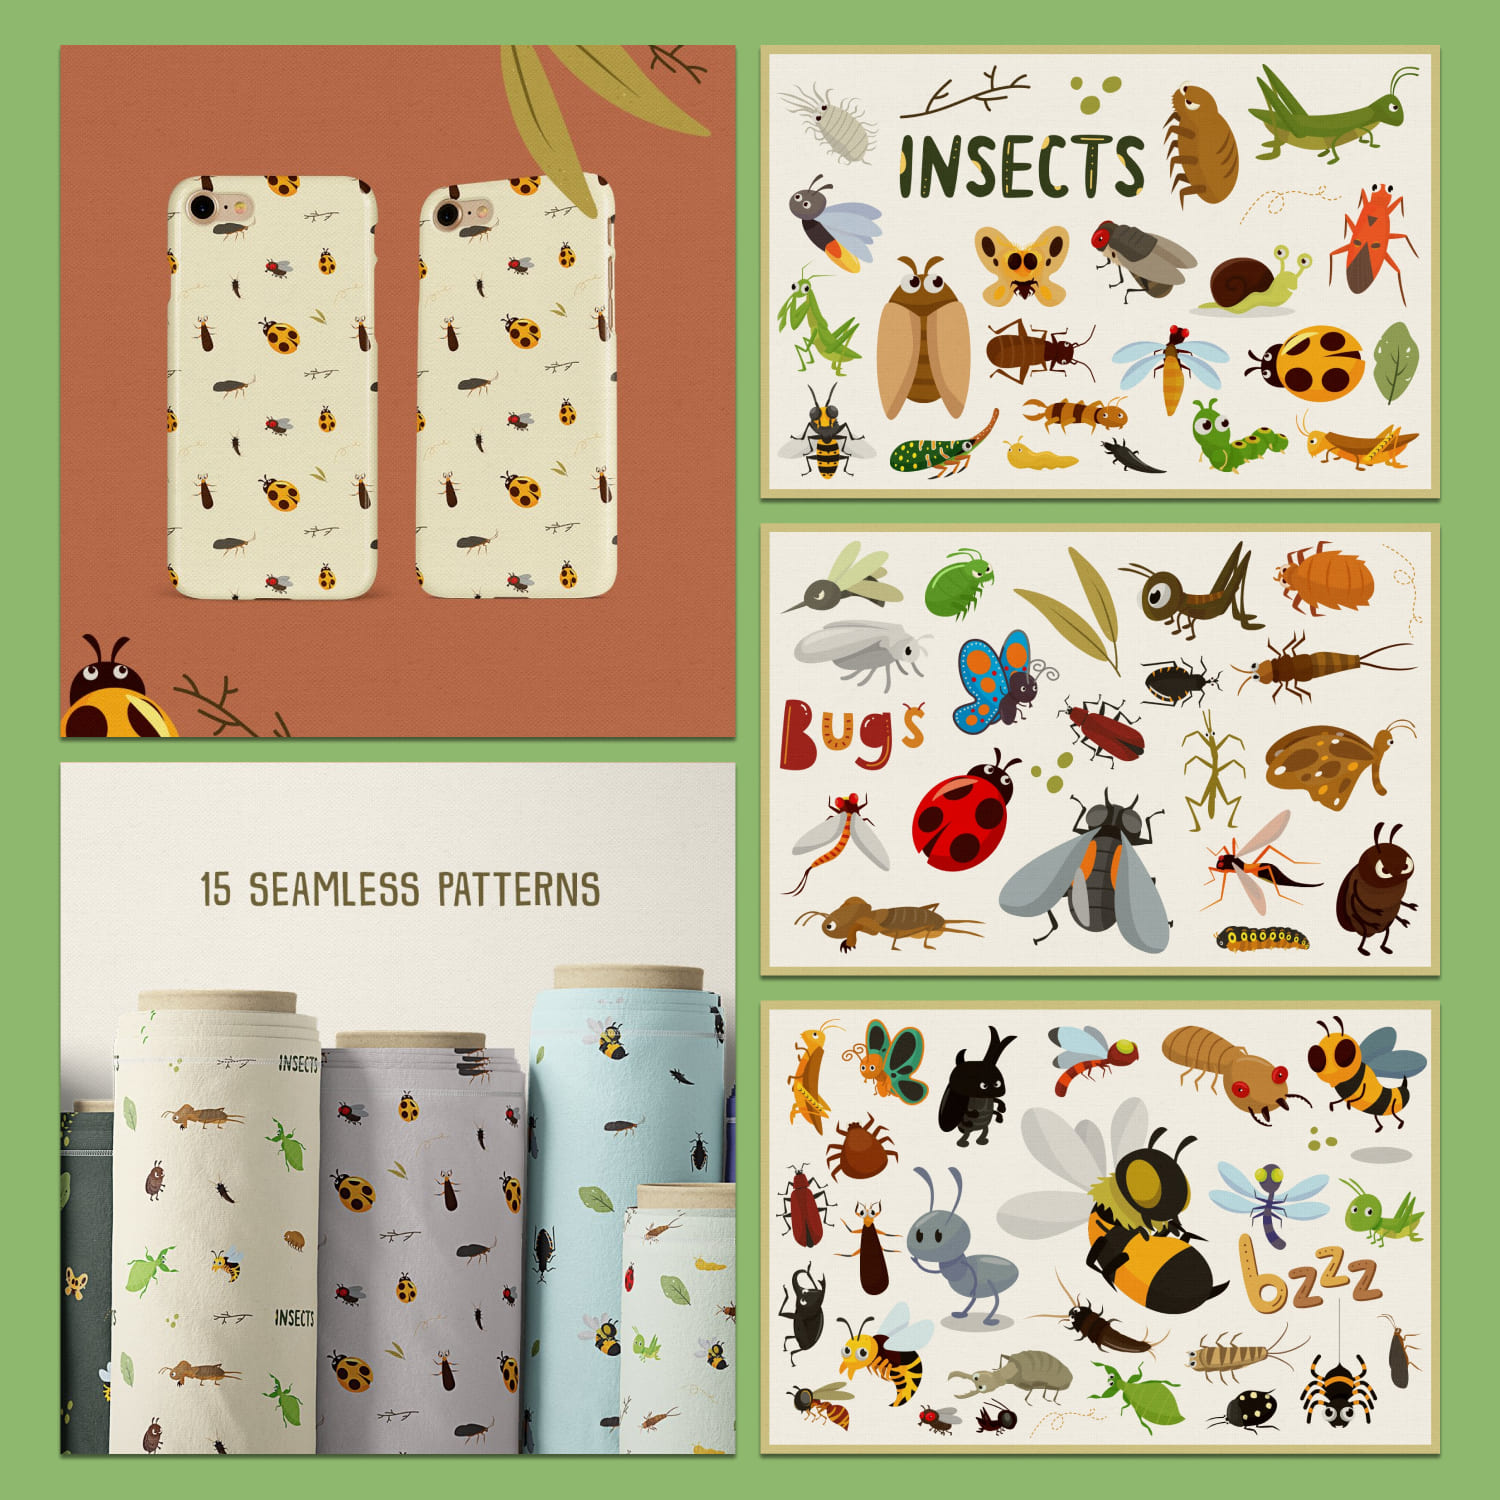 Insects and Bugs Vector Clipart & Seamless Patterns cover.